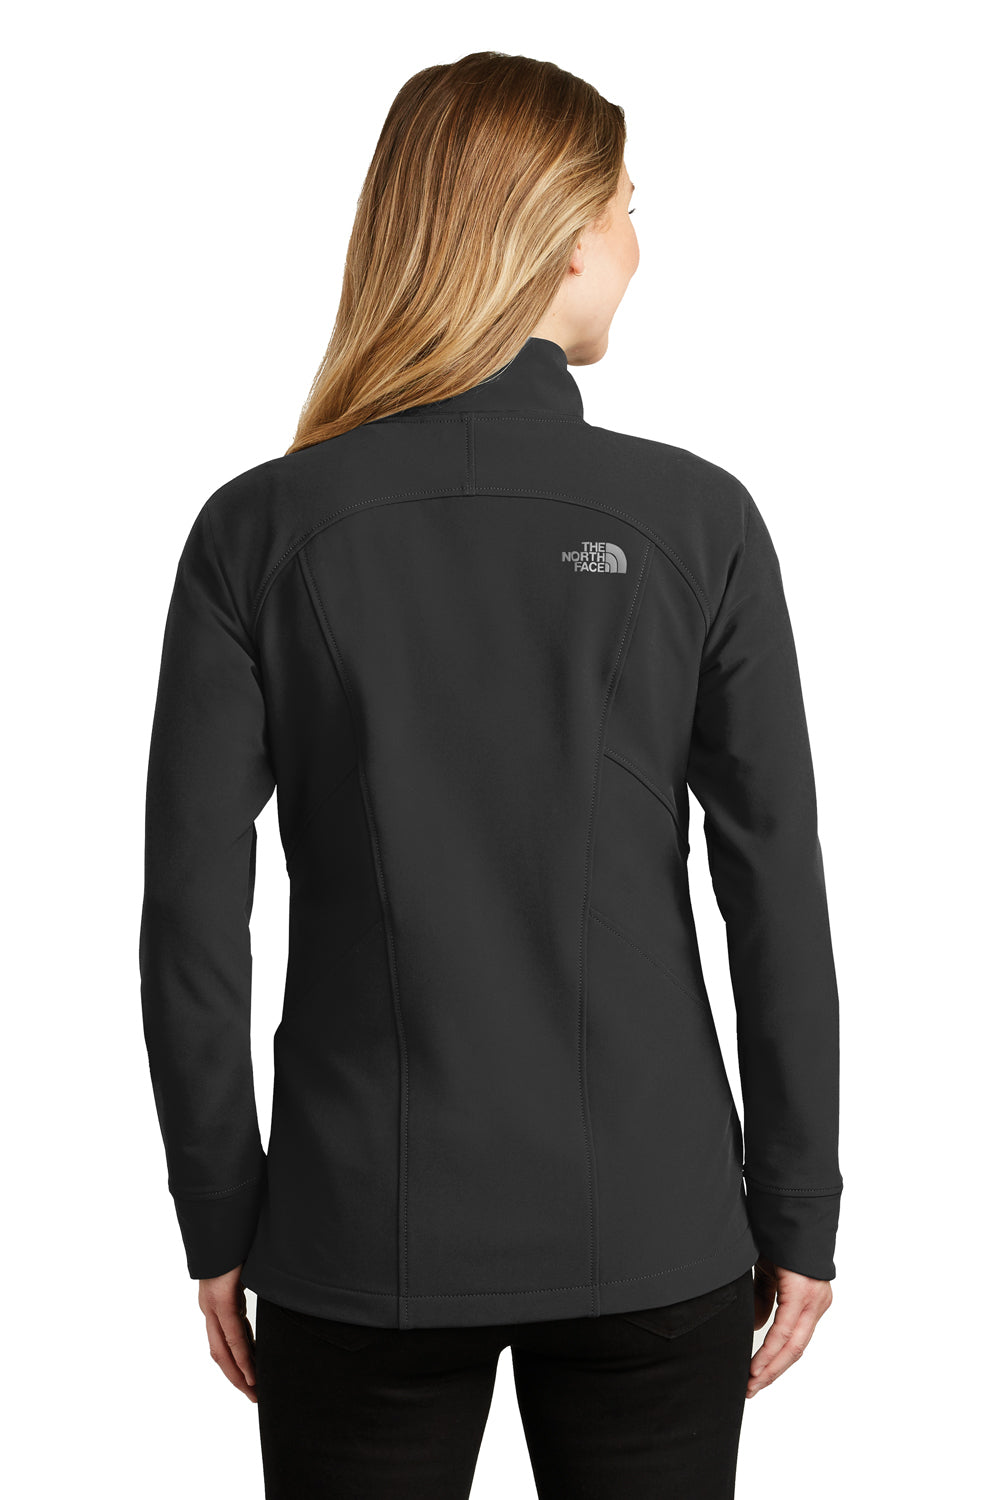 The North Face NF0A3LGW Womens Tech Wind & Water Resistant Full Zip Jacket Black Back